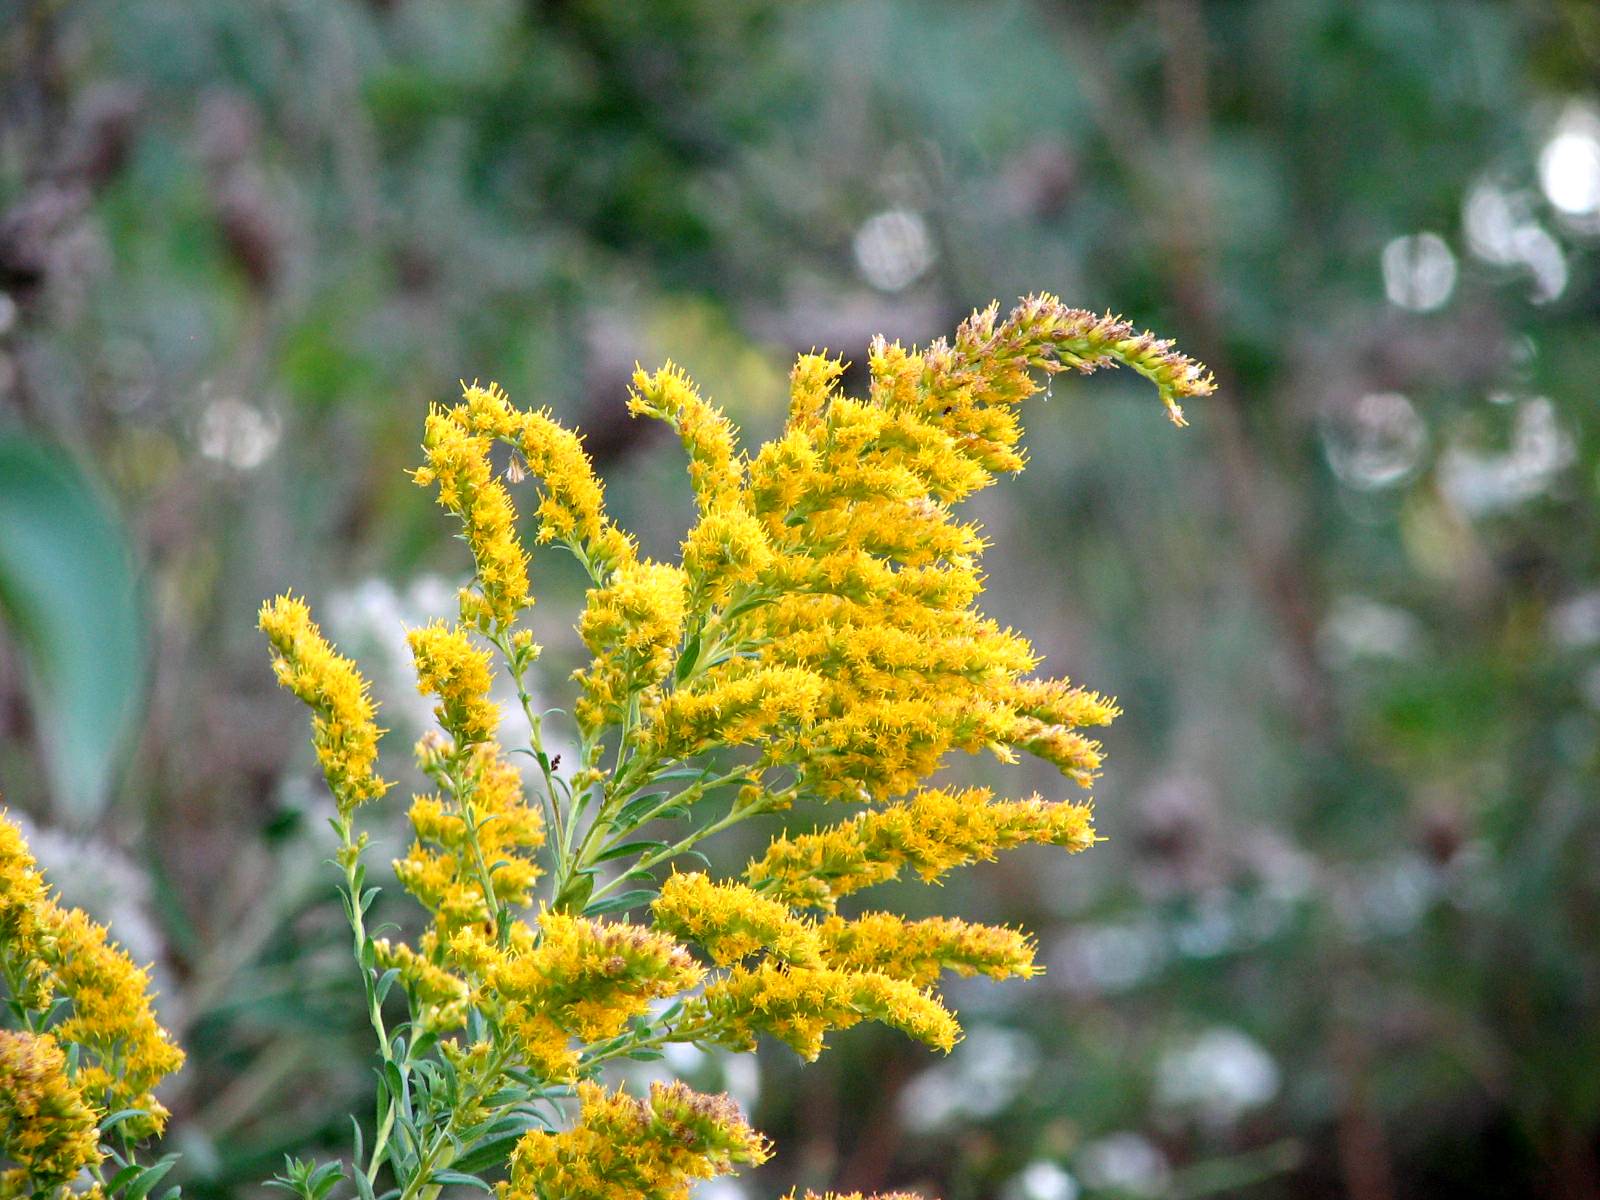 yellow flowers and leaves of a shrub in the foreground